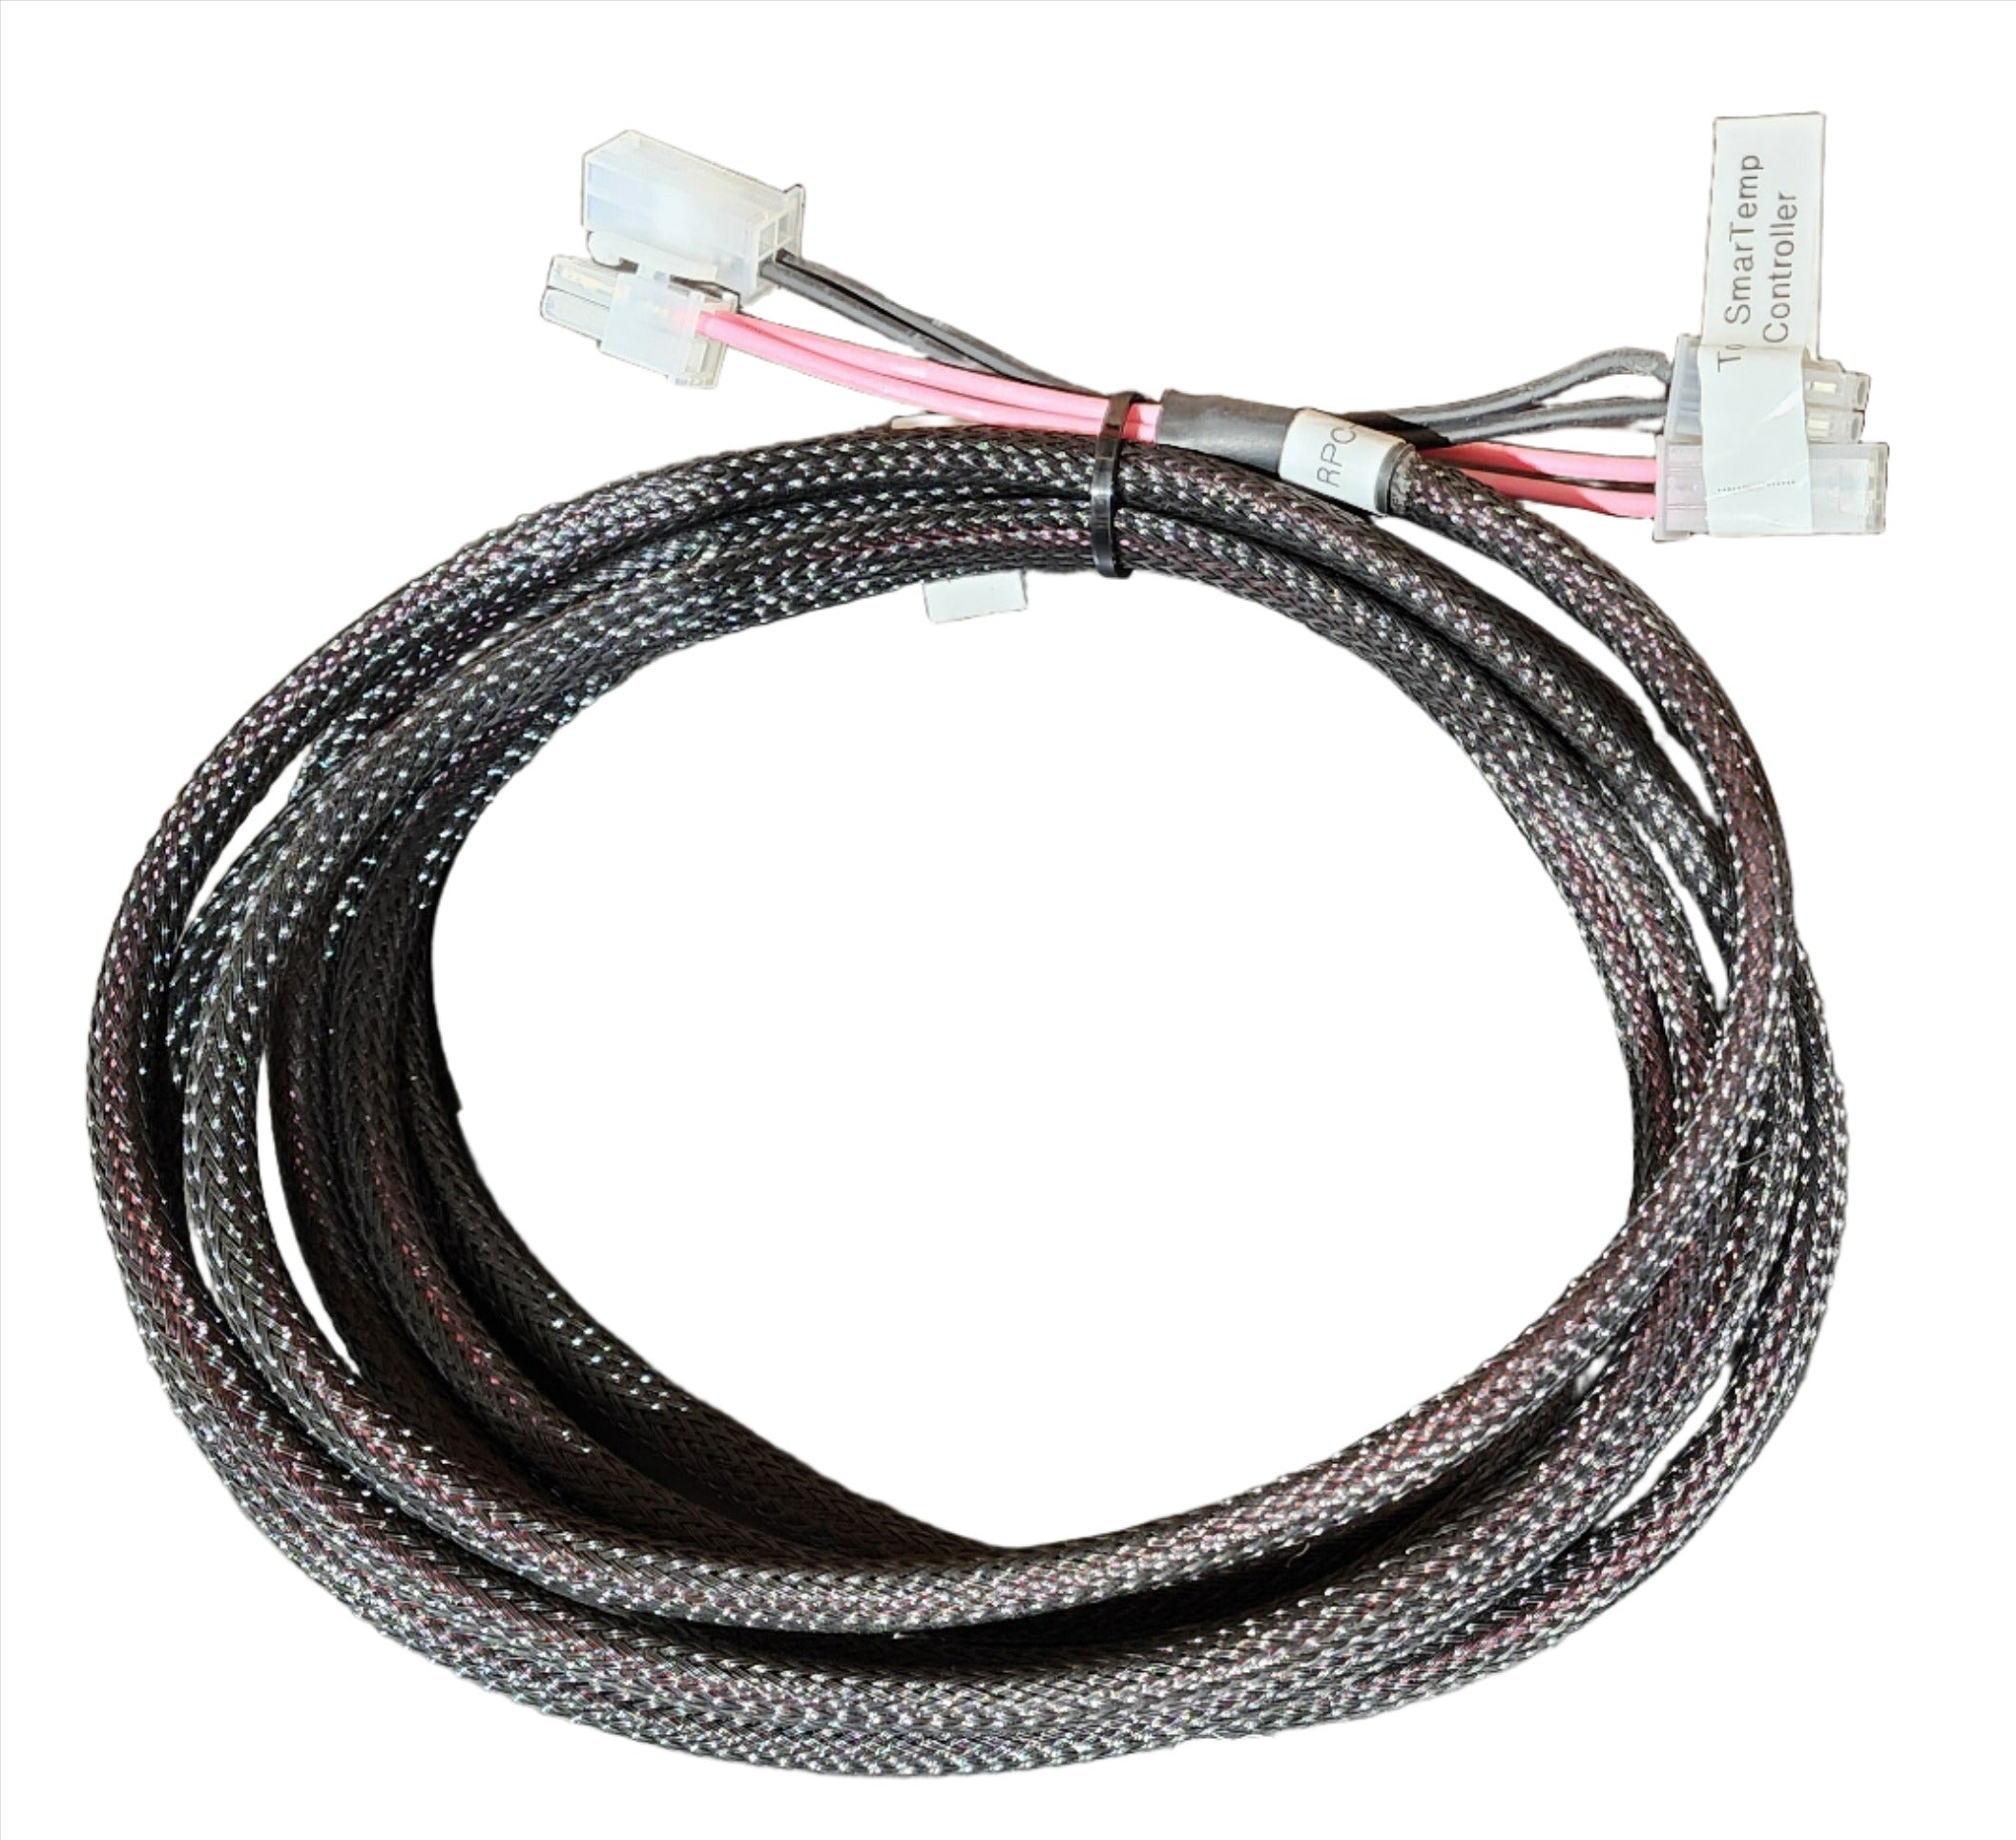 Wiring Harness Extension, for Webasto Smartemp 3.0 Control, 3.5 Meter RPC1010001